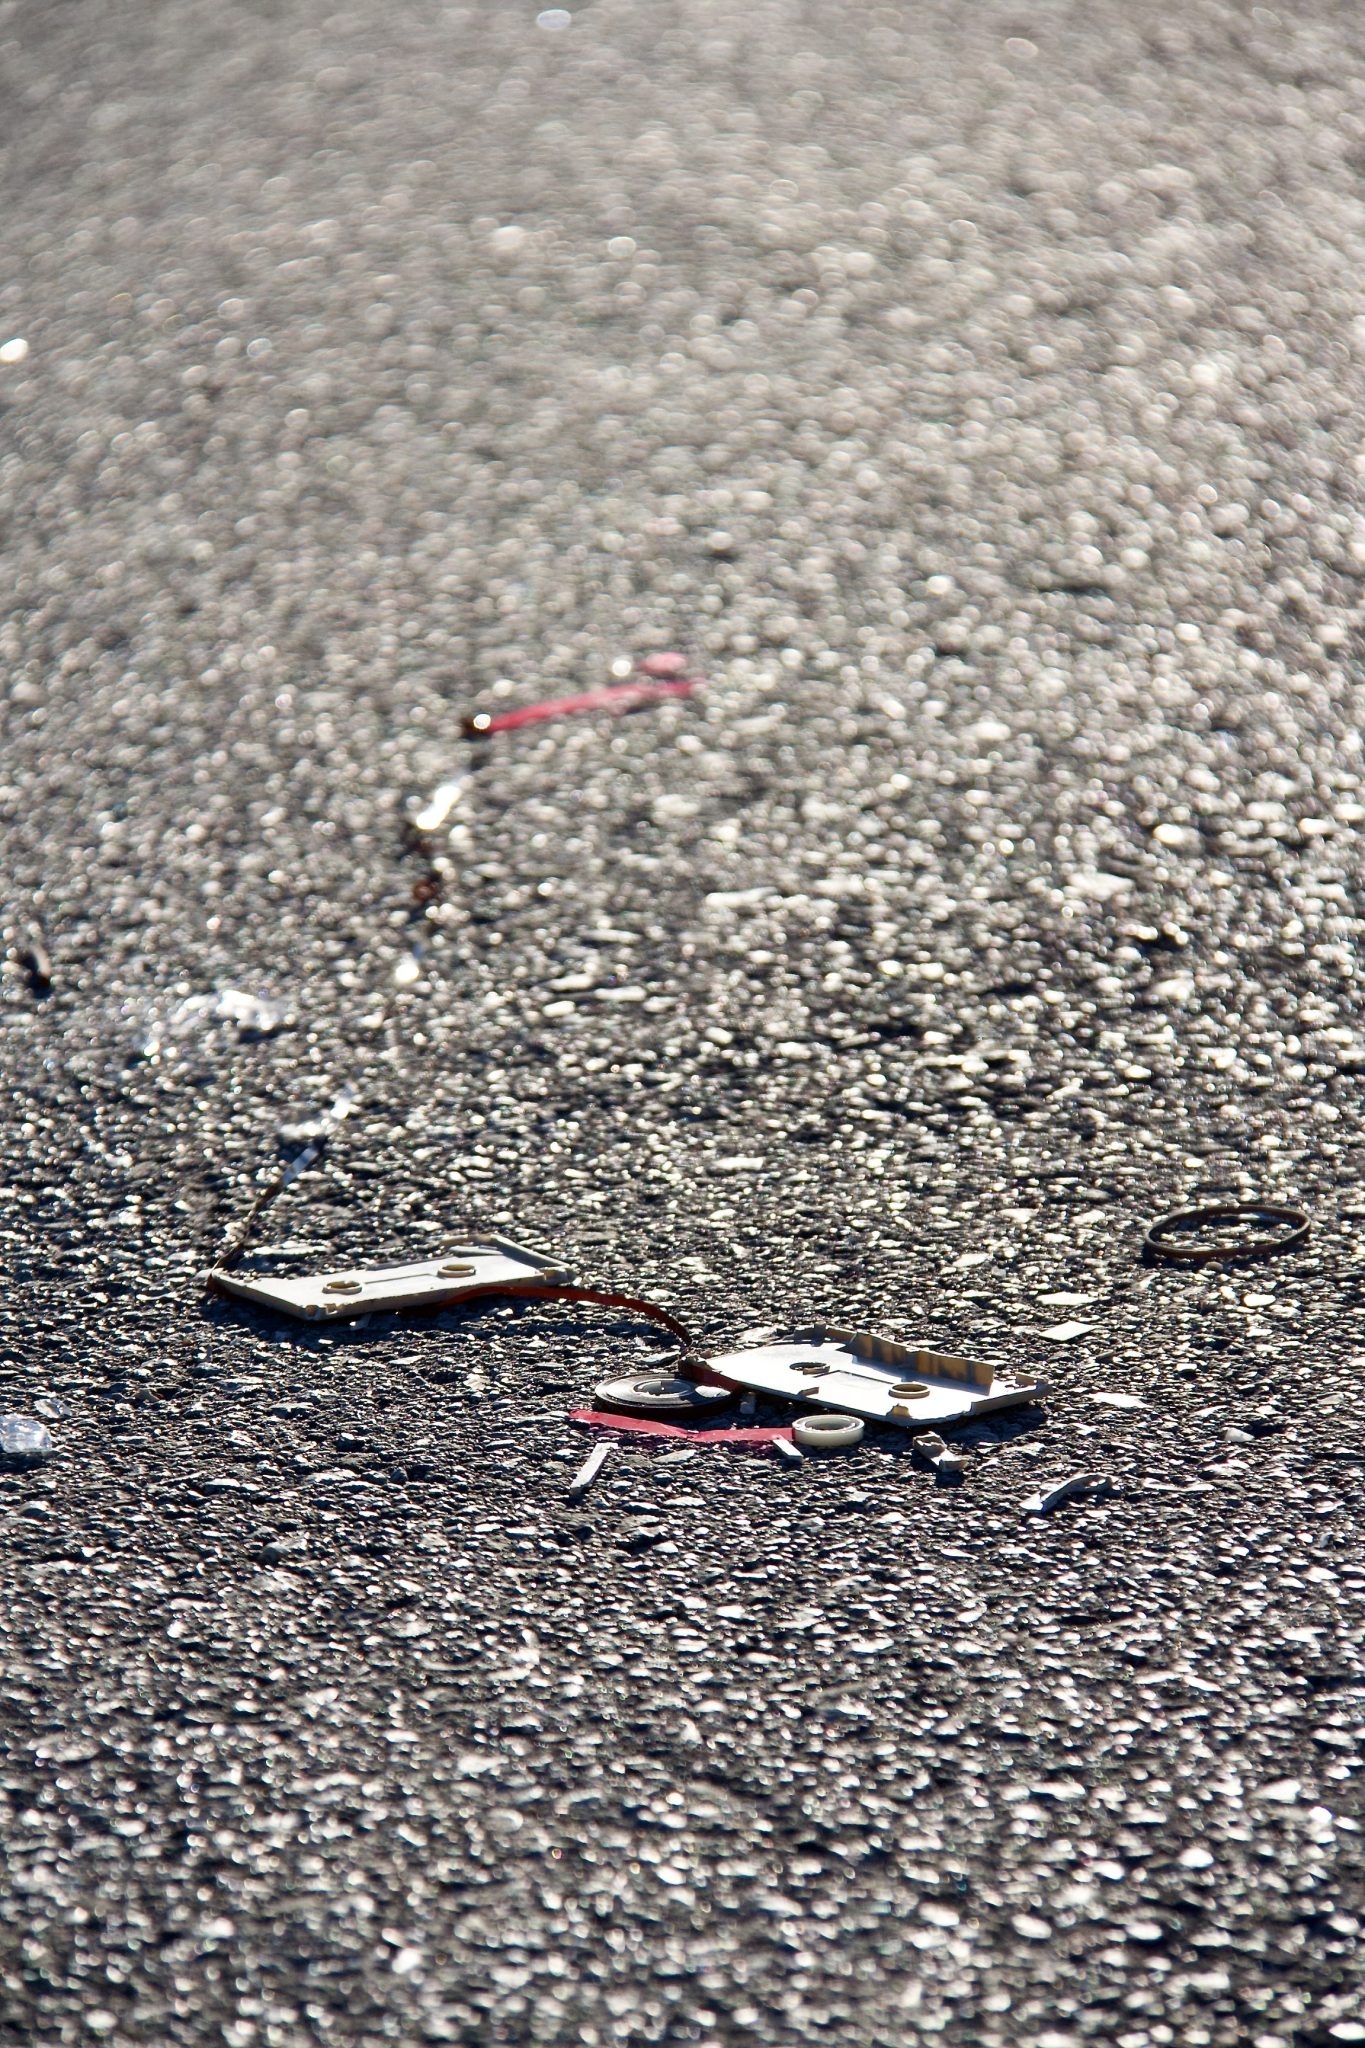 A broken cassette tape laying in the middle of the road